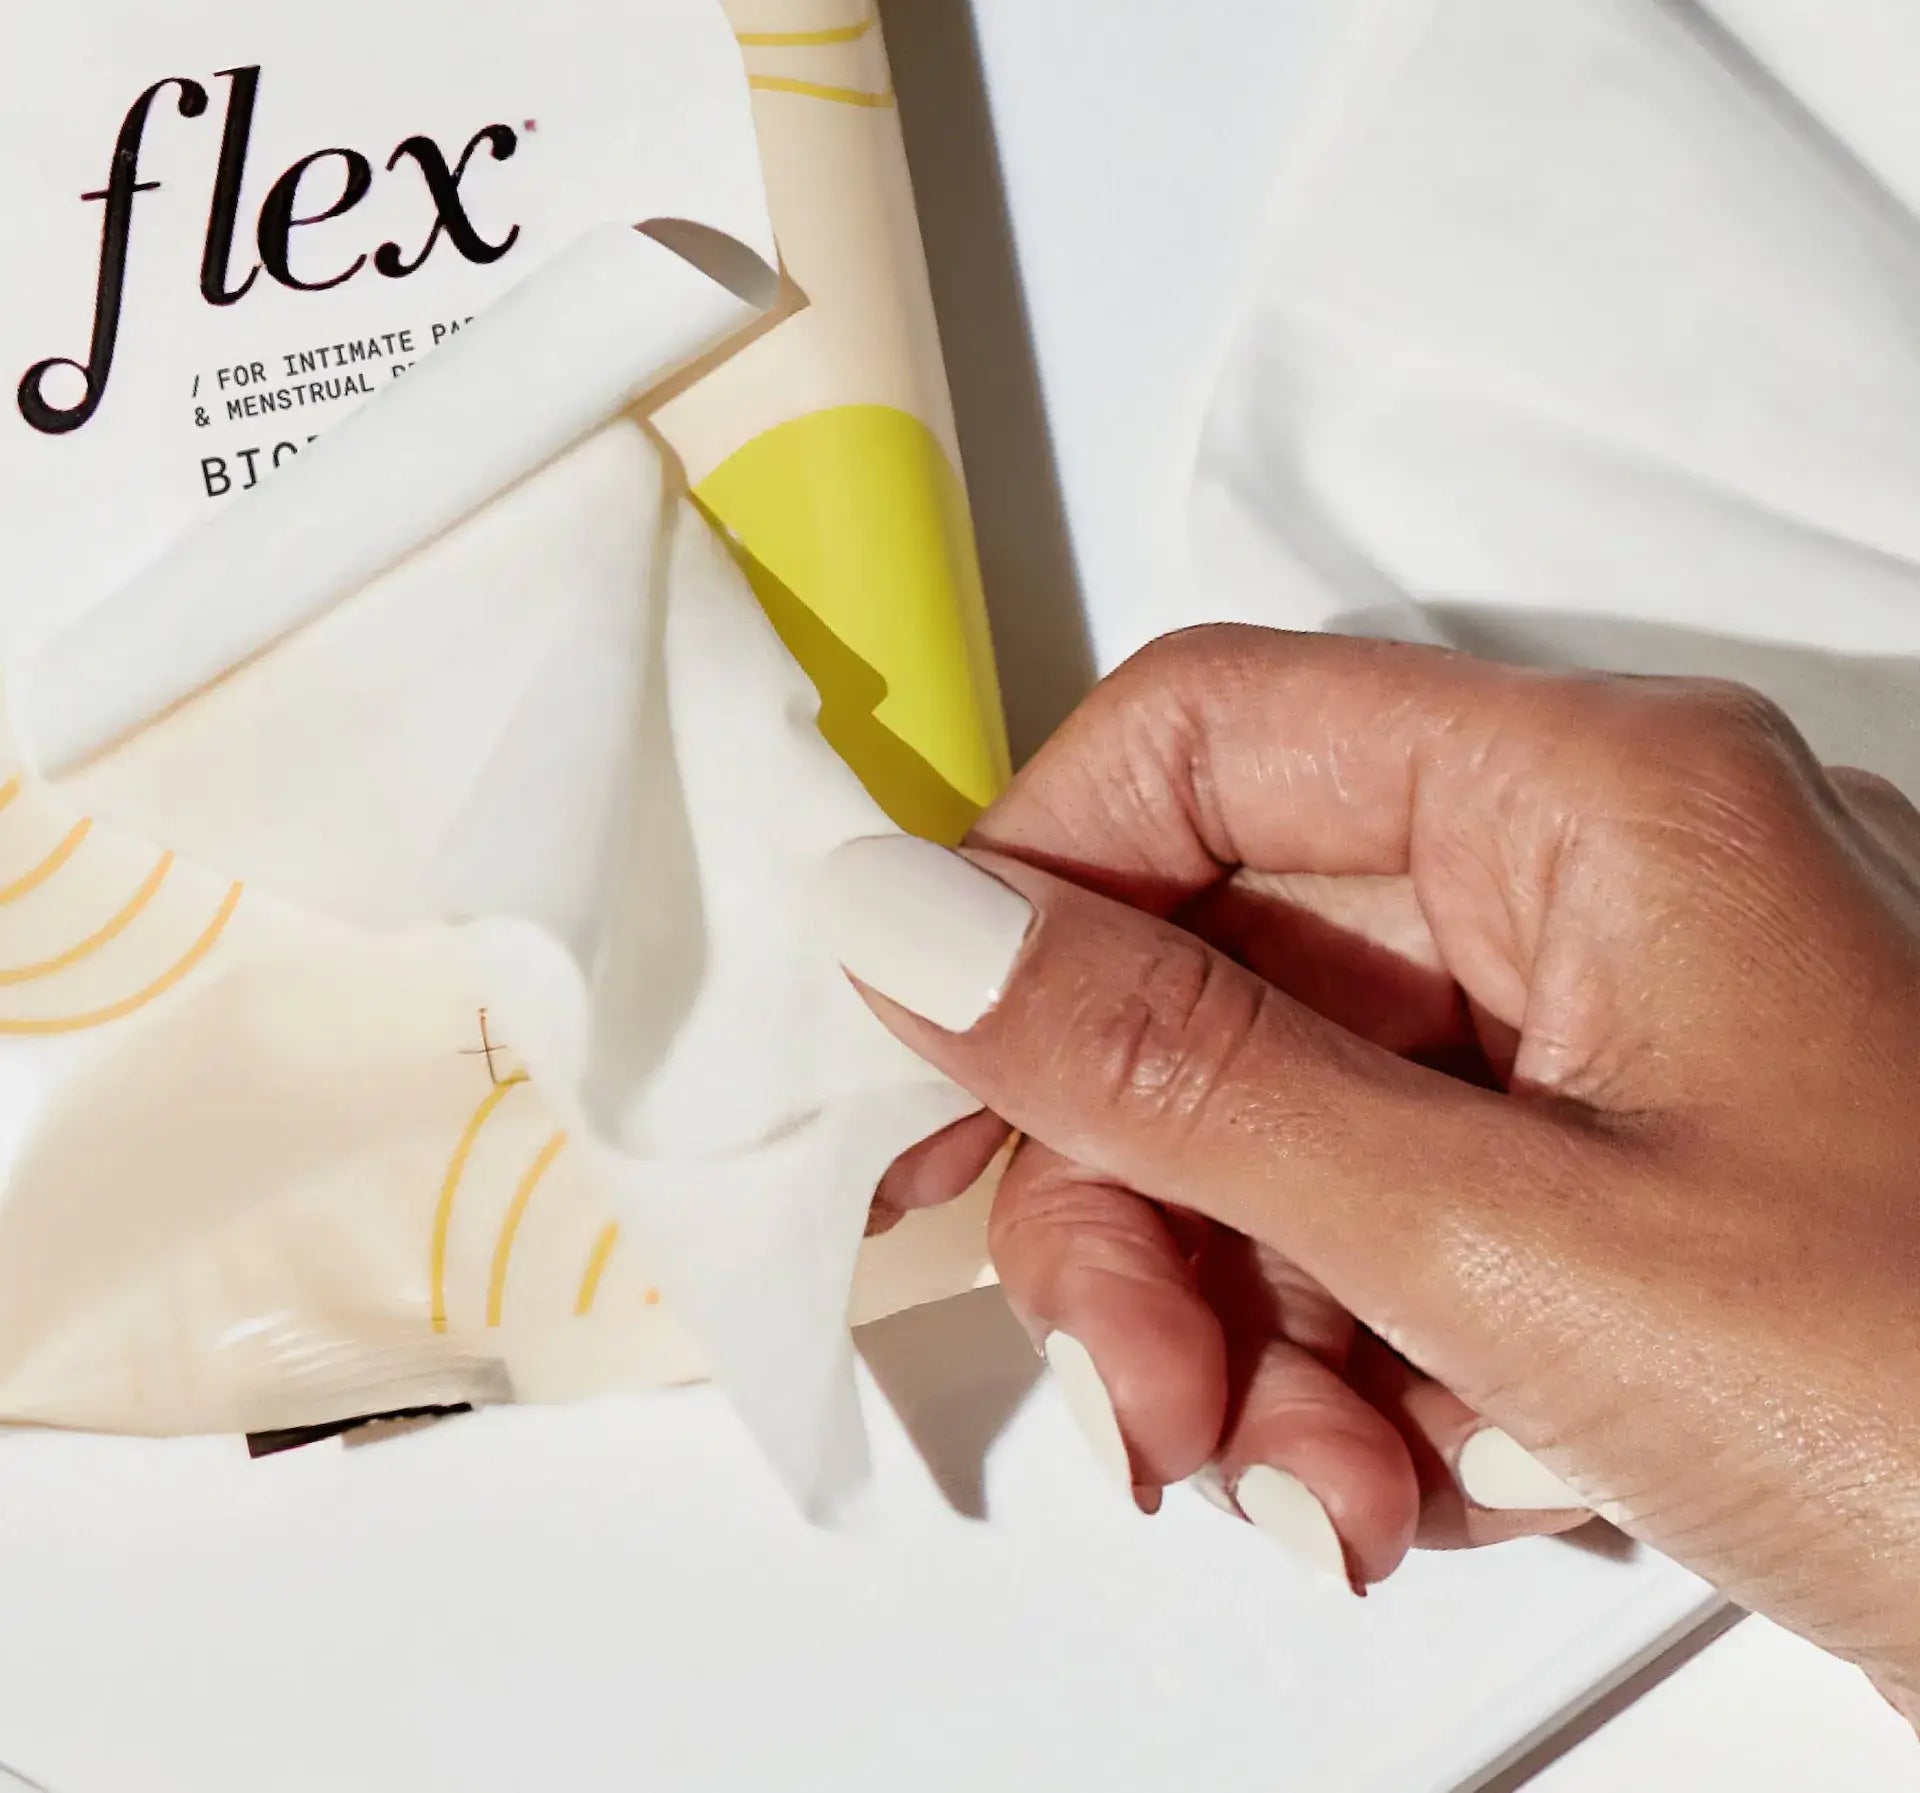 flex-biodegradable-wipes-out-of-a-pack-of-wipes.webp